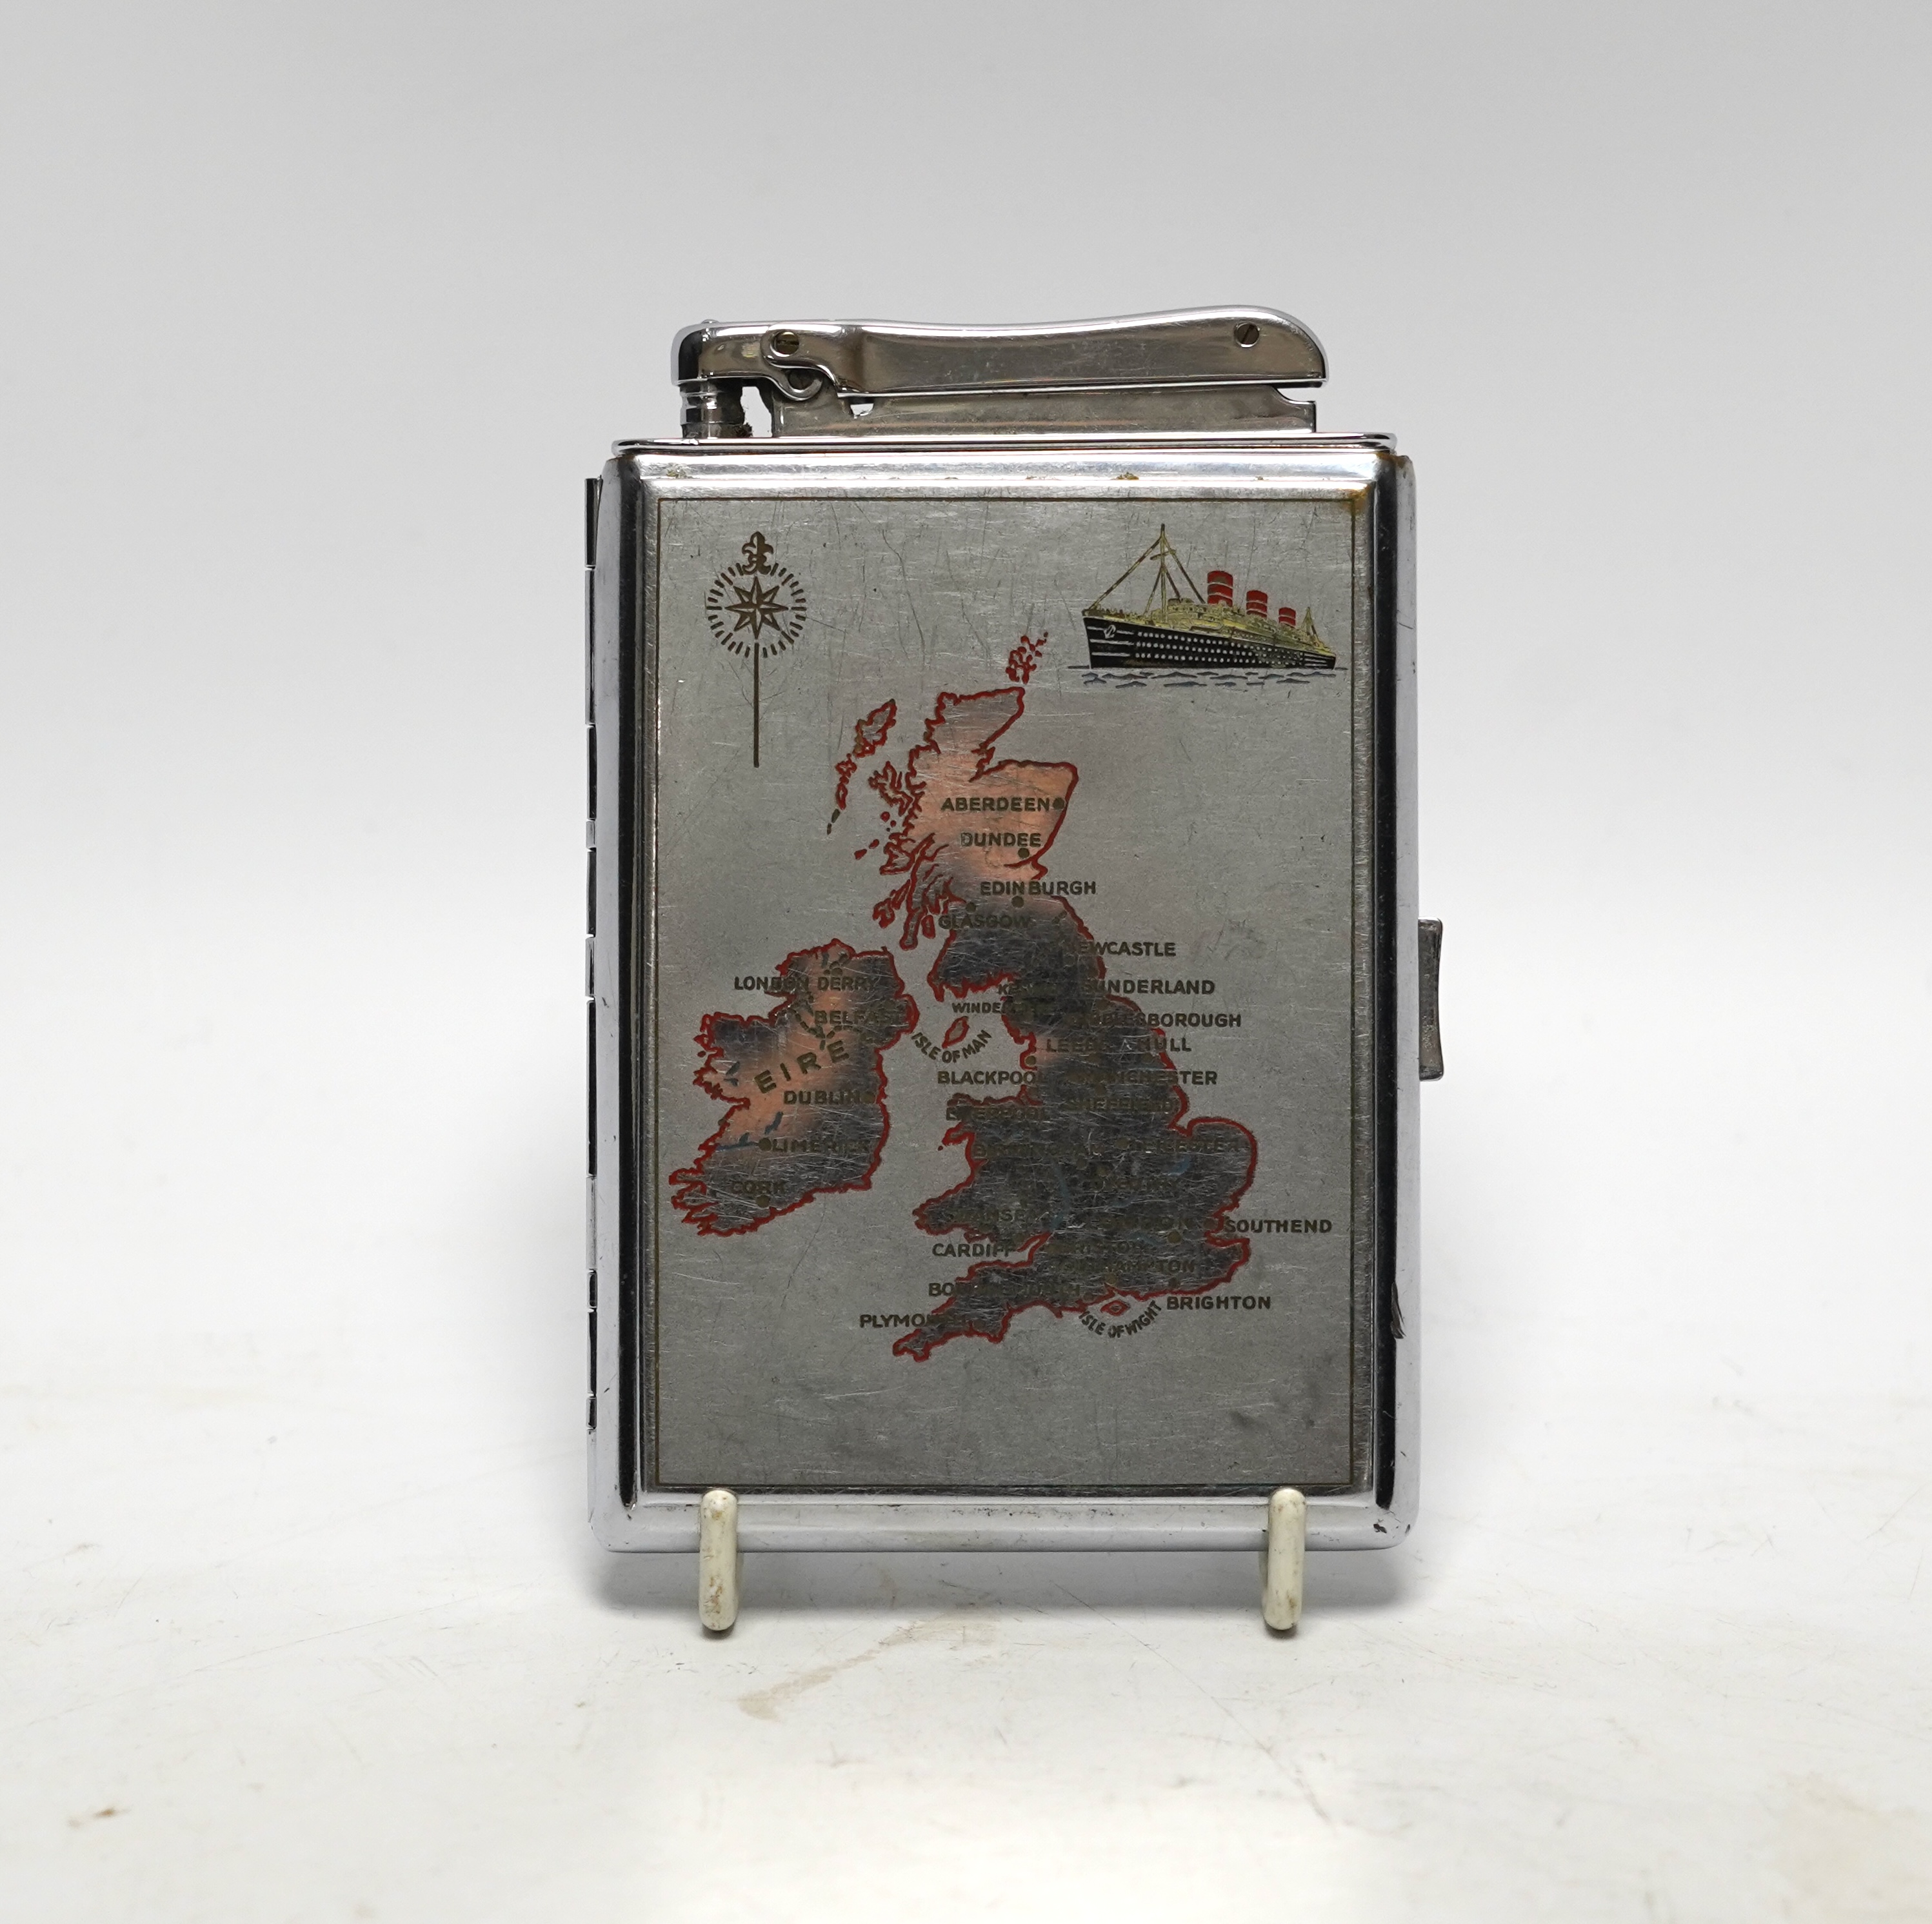 A large chrome Calibri chrome lighter and combination cigarette case with a map of the UK and a ship on the front, 12cm high